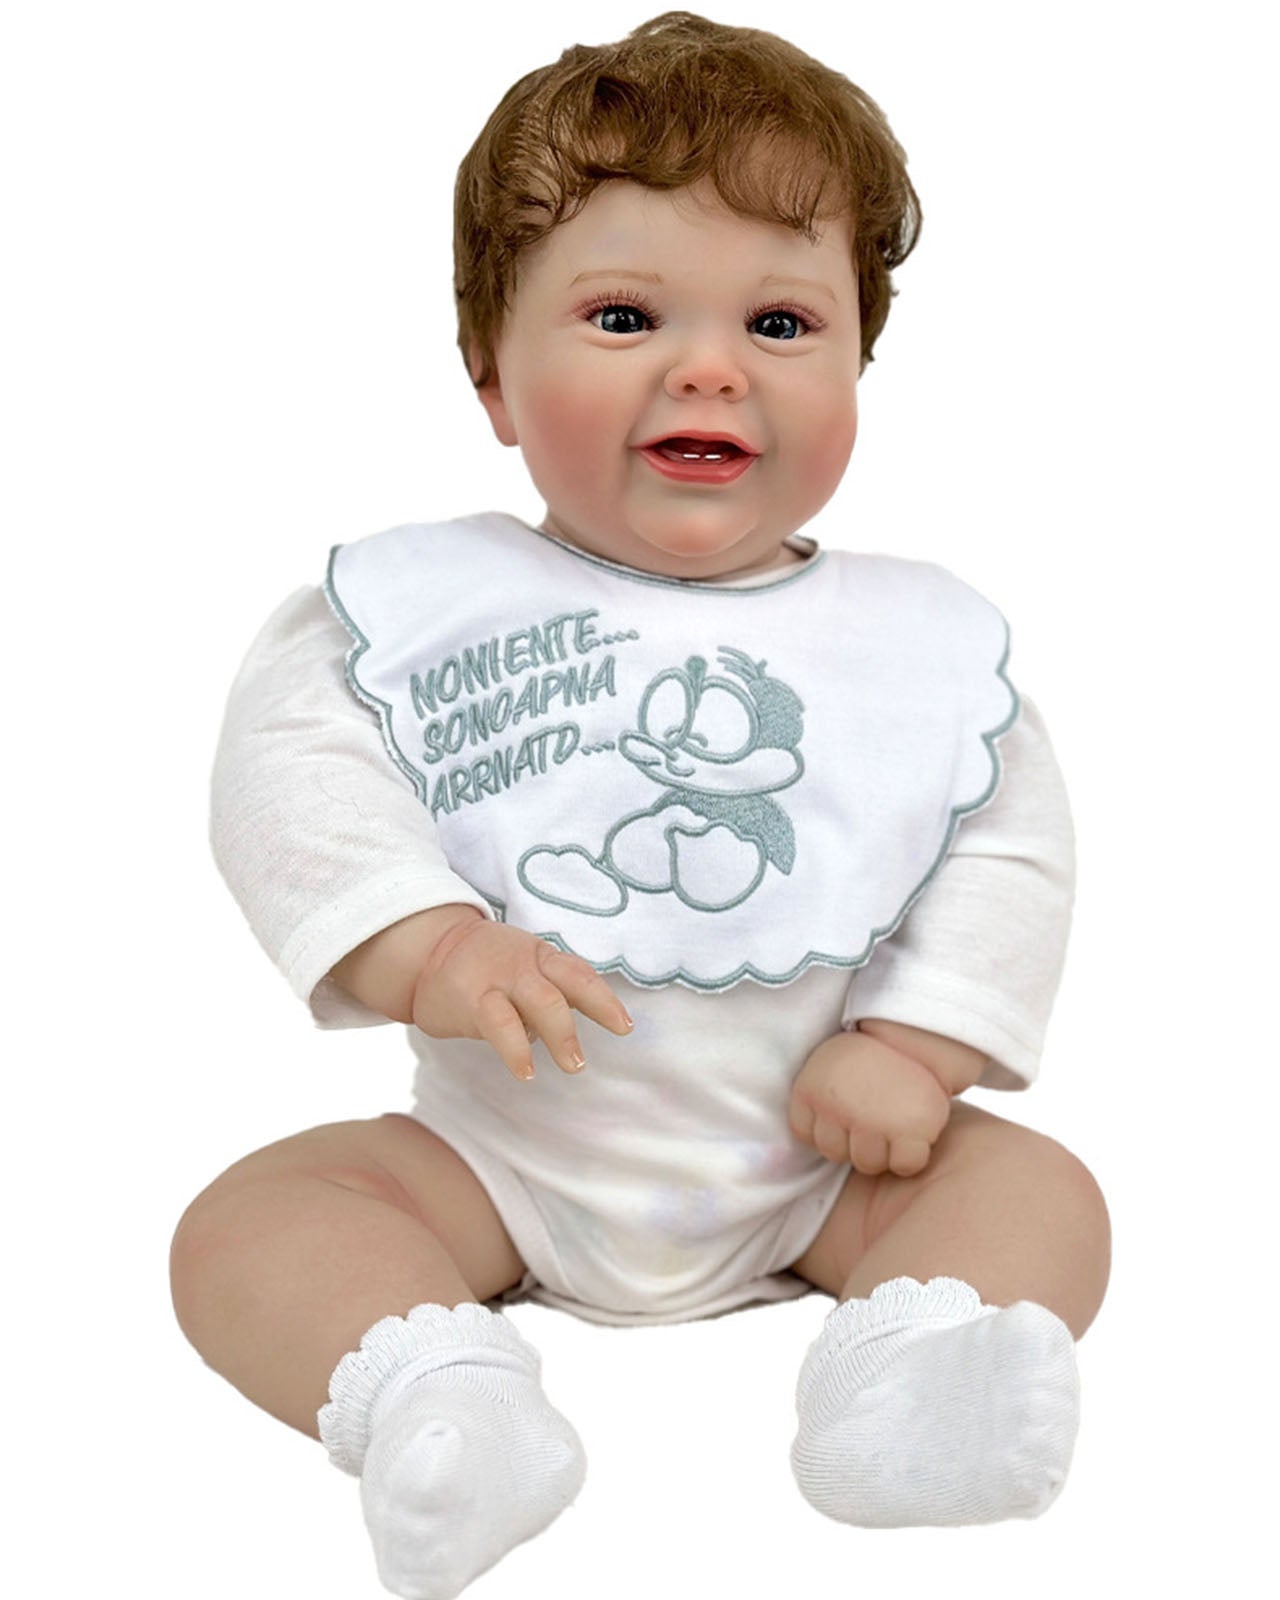 22-inch 1.7 kg Reborn Baby Doll toothy smiling boy - Vacos Store – vacos